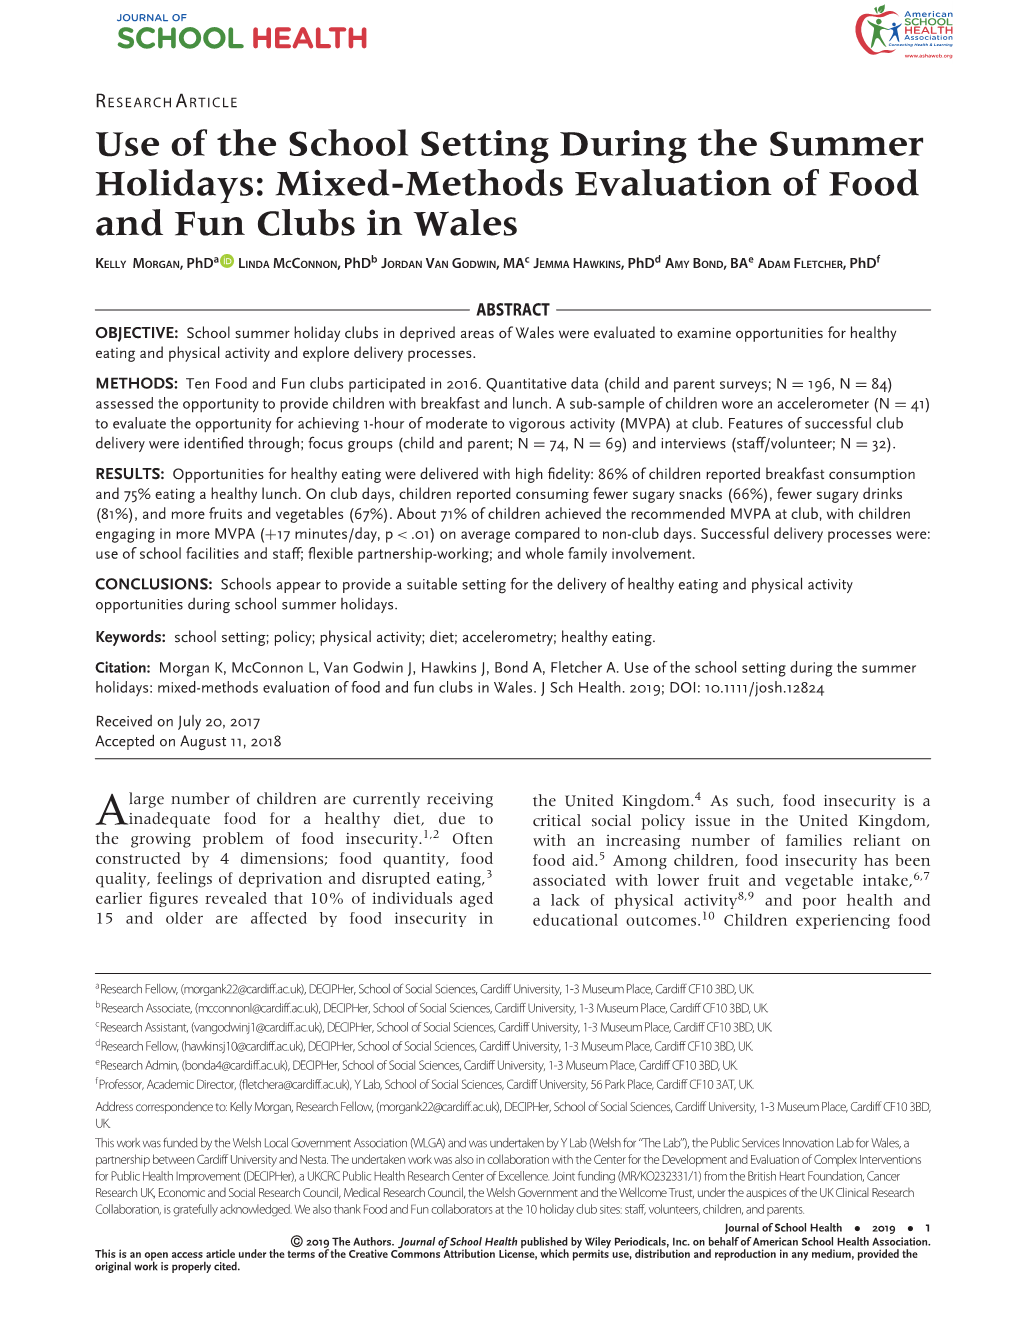 Use of the School Setting During the Summer Holidays: Mixed-Methods Evaluation of Food and Fun Clubs in Wales